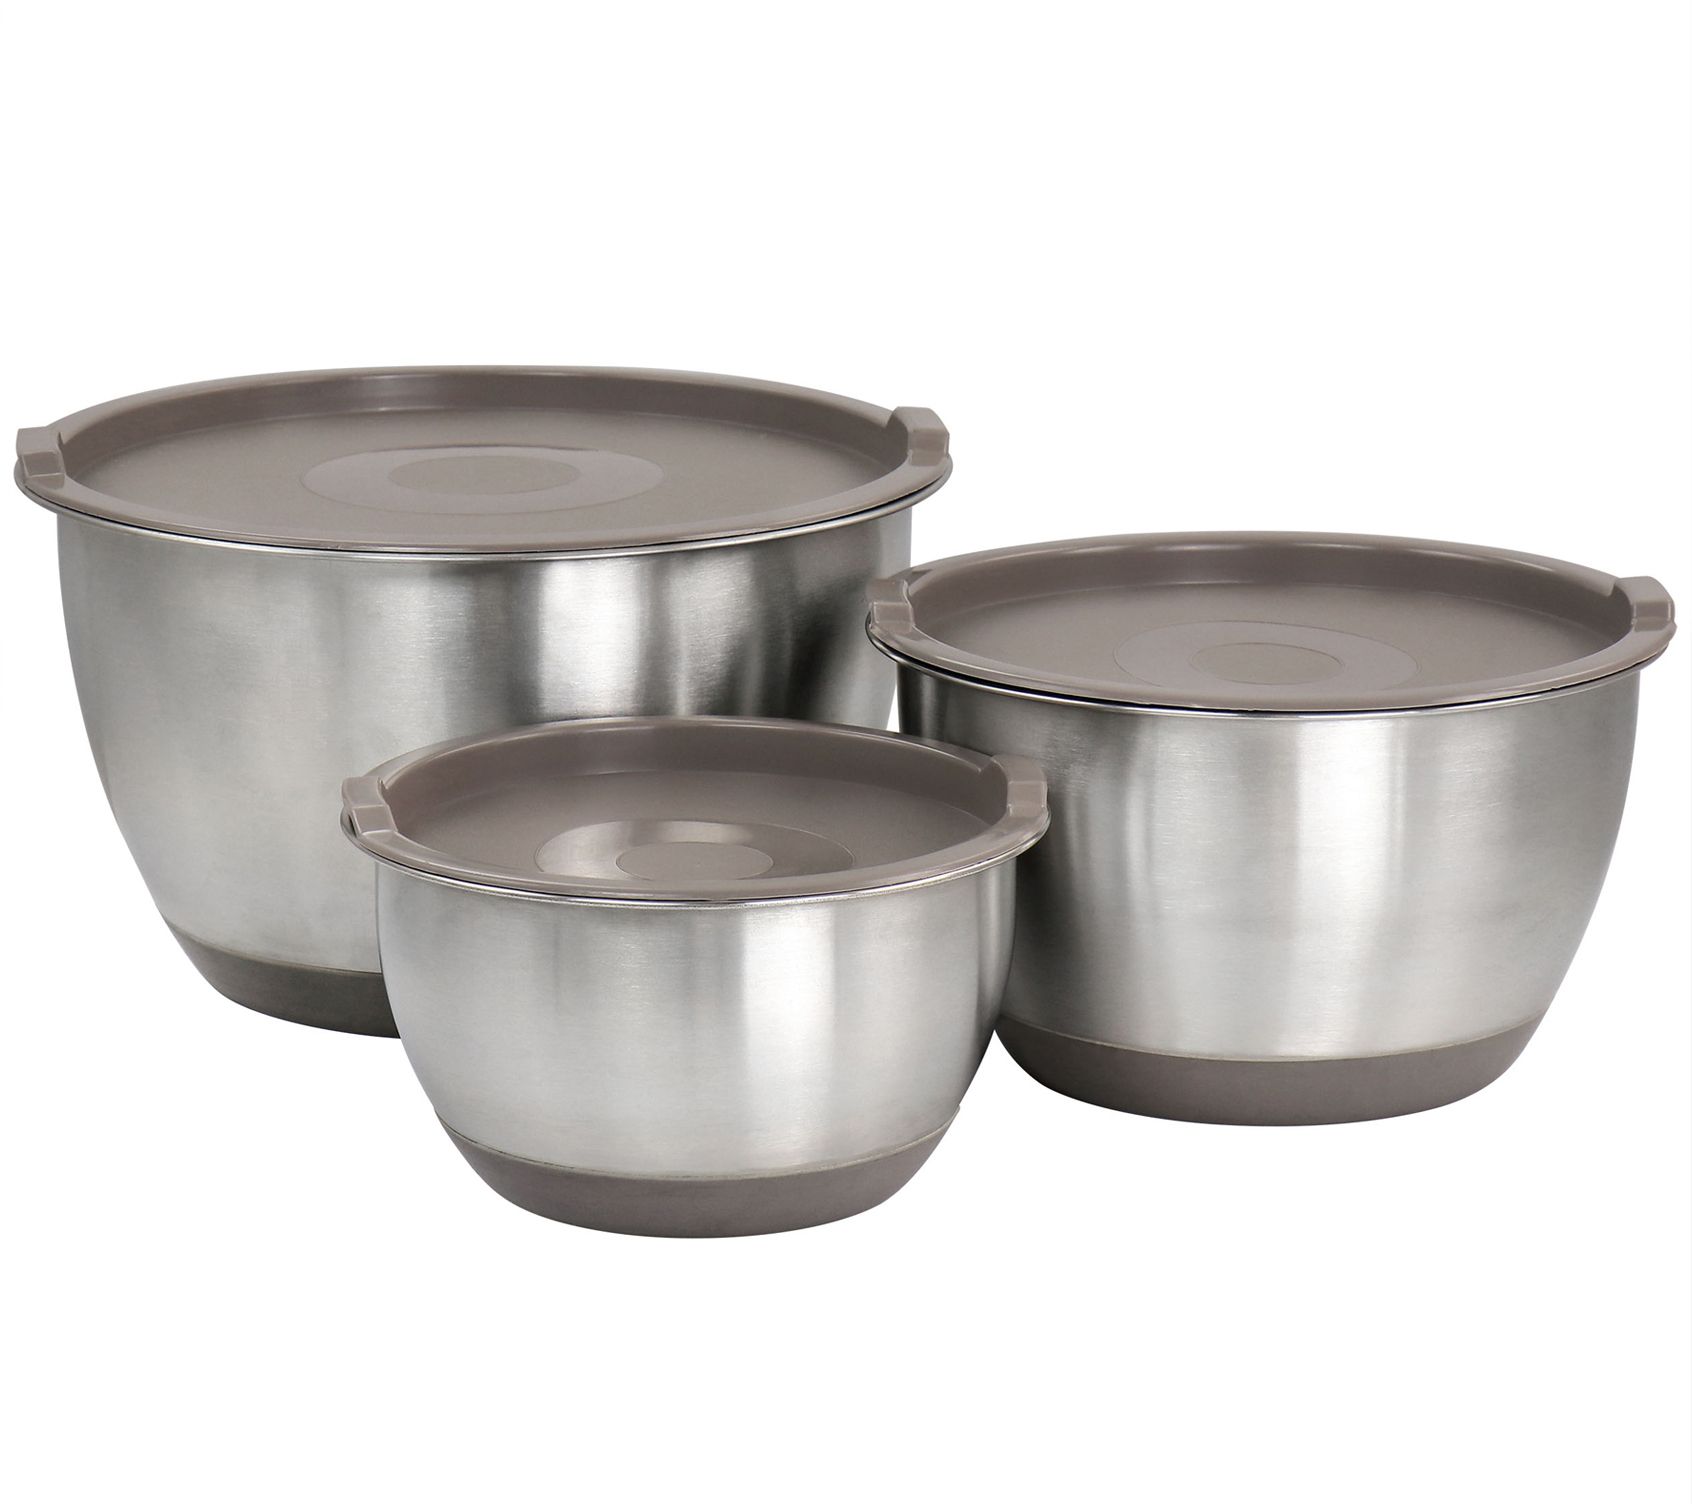 Cuisinart Multi-Prep 5 Piece Stainless Steel Mixing Bowl Set